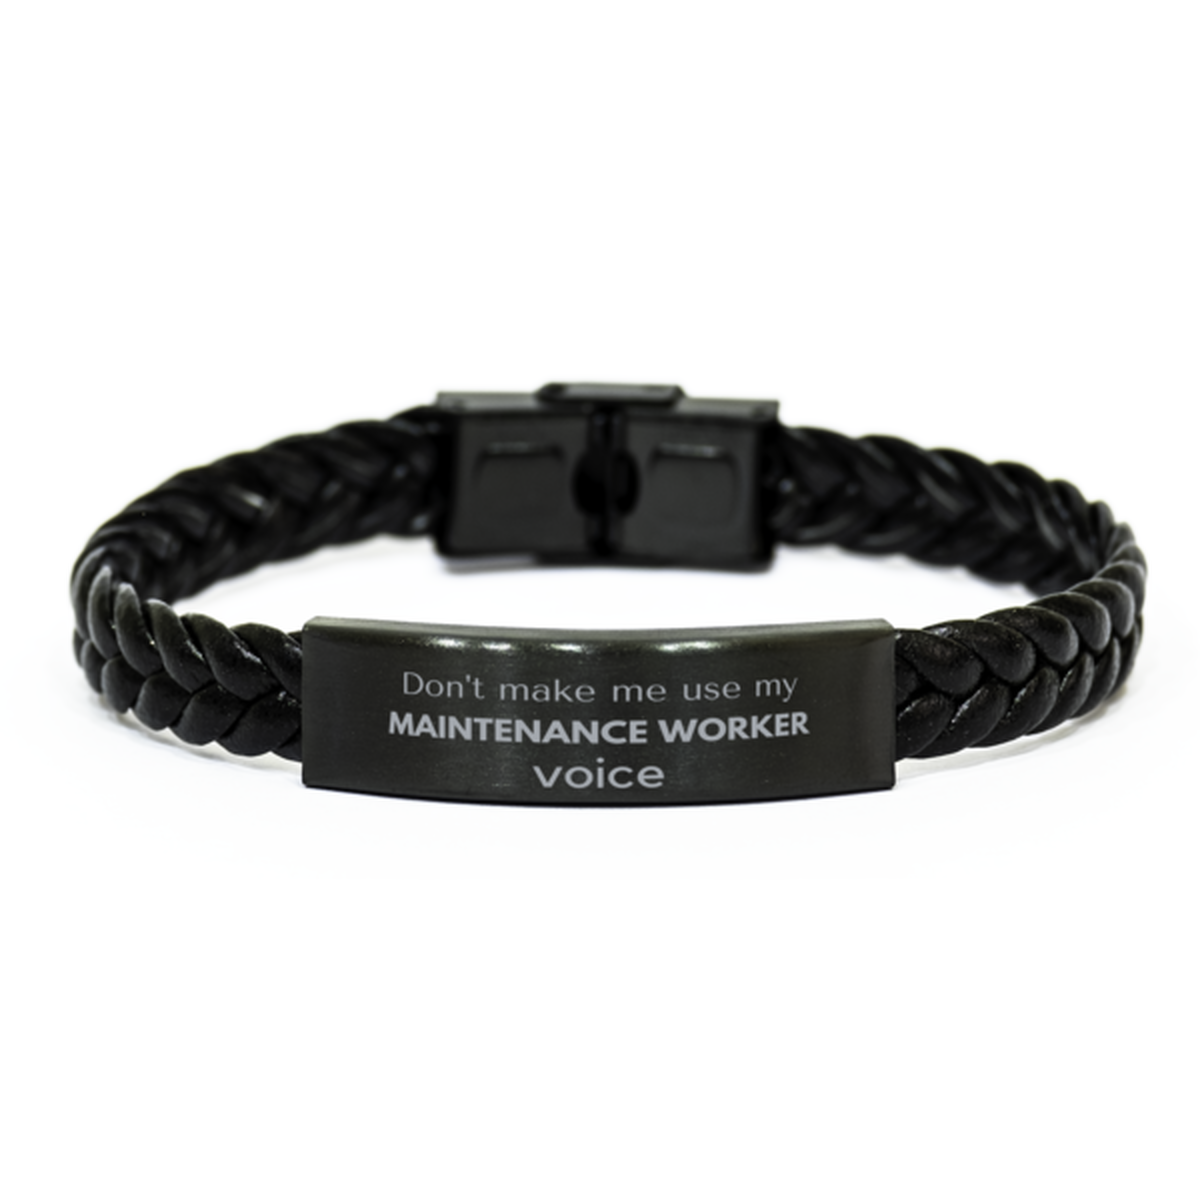 Don't make me use my Maintenance Worker voice, Sarcasm Maintenance Worker Gifts, Christmas Maintenance Worker Braided Leather Bracelet Birthday Unique Gifts For Maintenance Worker Coworkers, Men, Women, Colleague, Friends